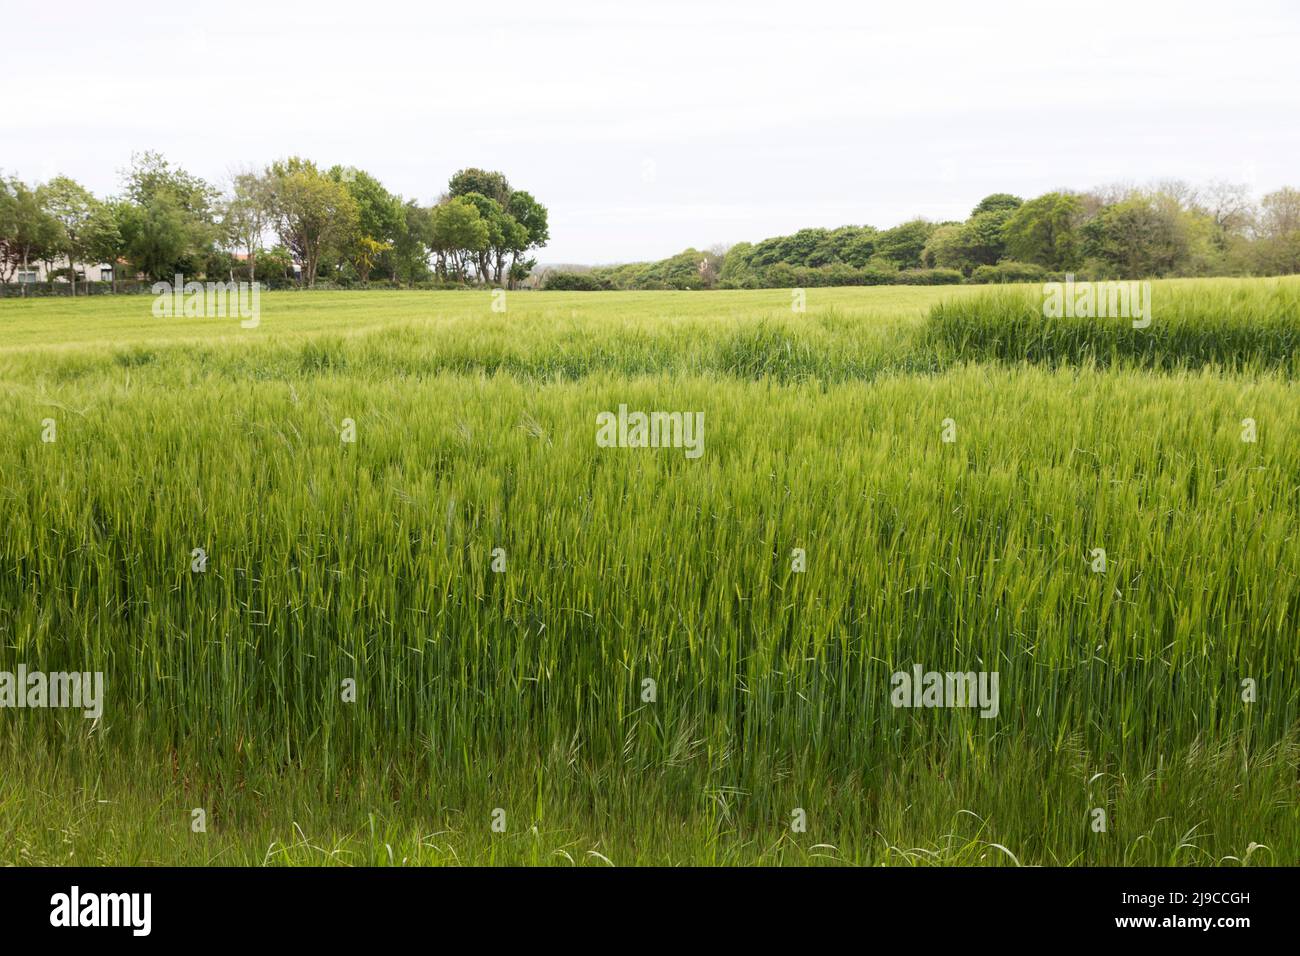 Crop growing in a field in Sunderland, England. It grows on tell-tended farmland. Stock Photo